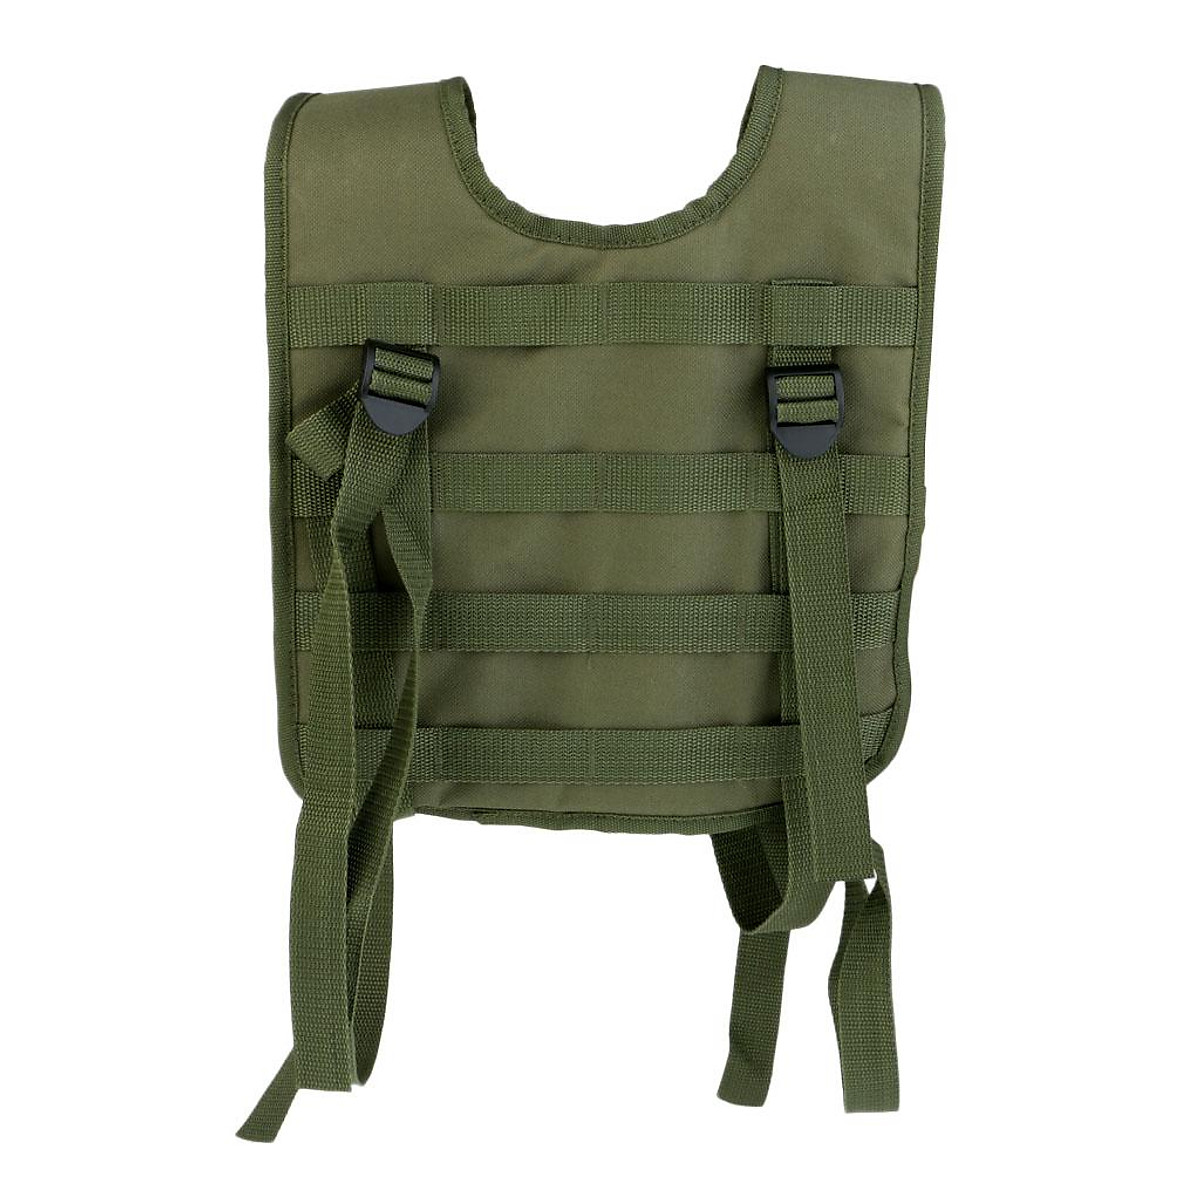 MilTec  Reactor Modular Vest  Black  10712102  MILOUT  Military   Outdoor  Battle tested products only